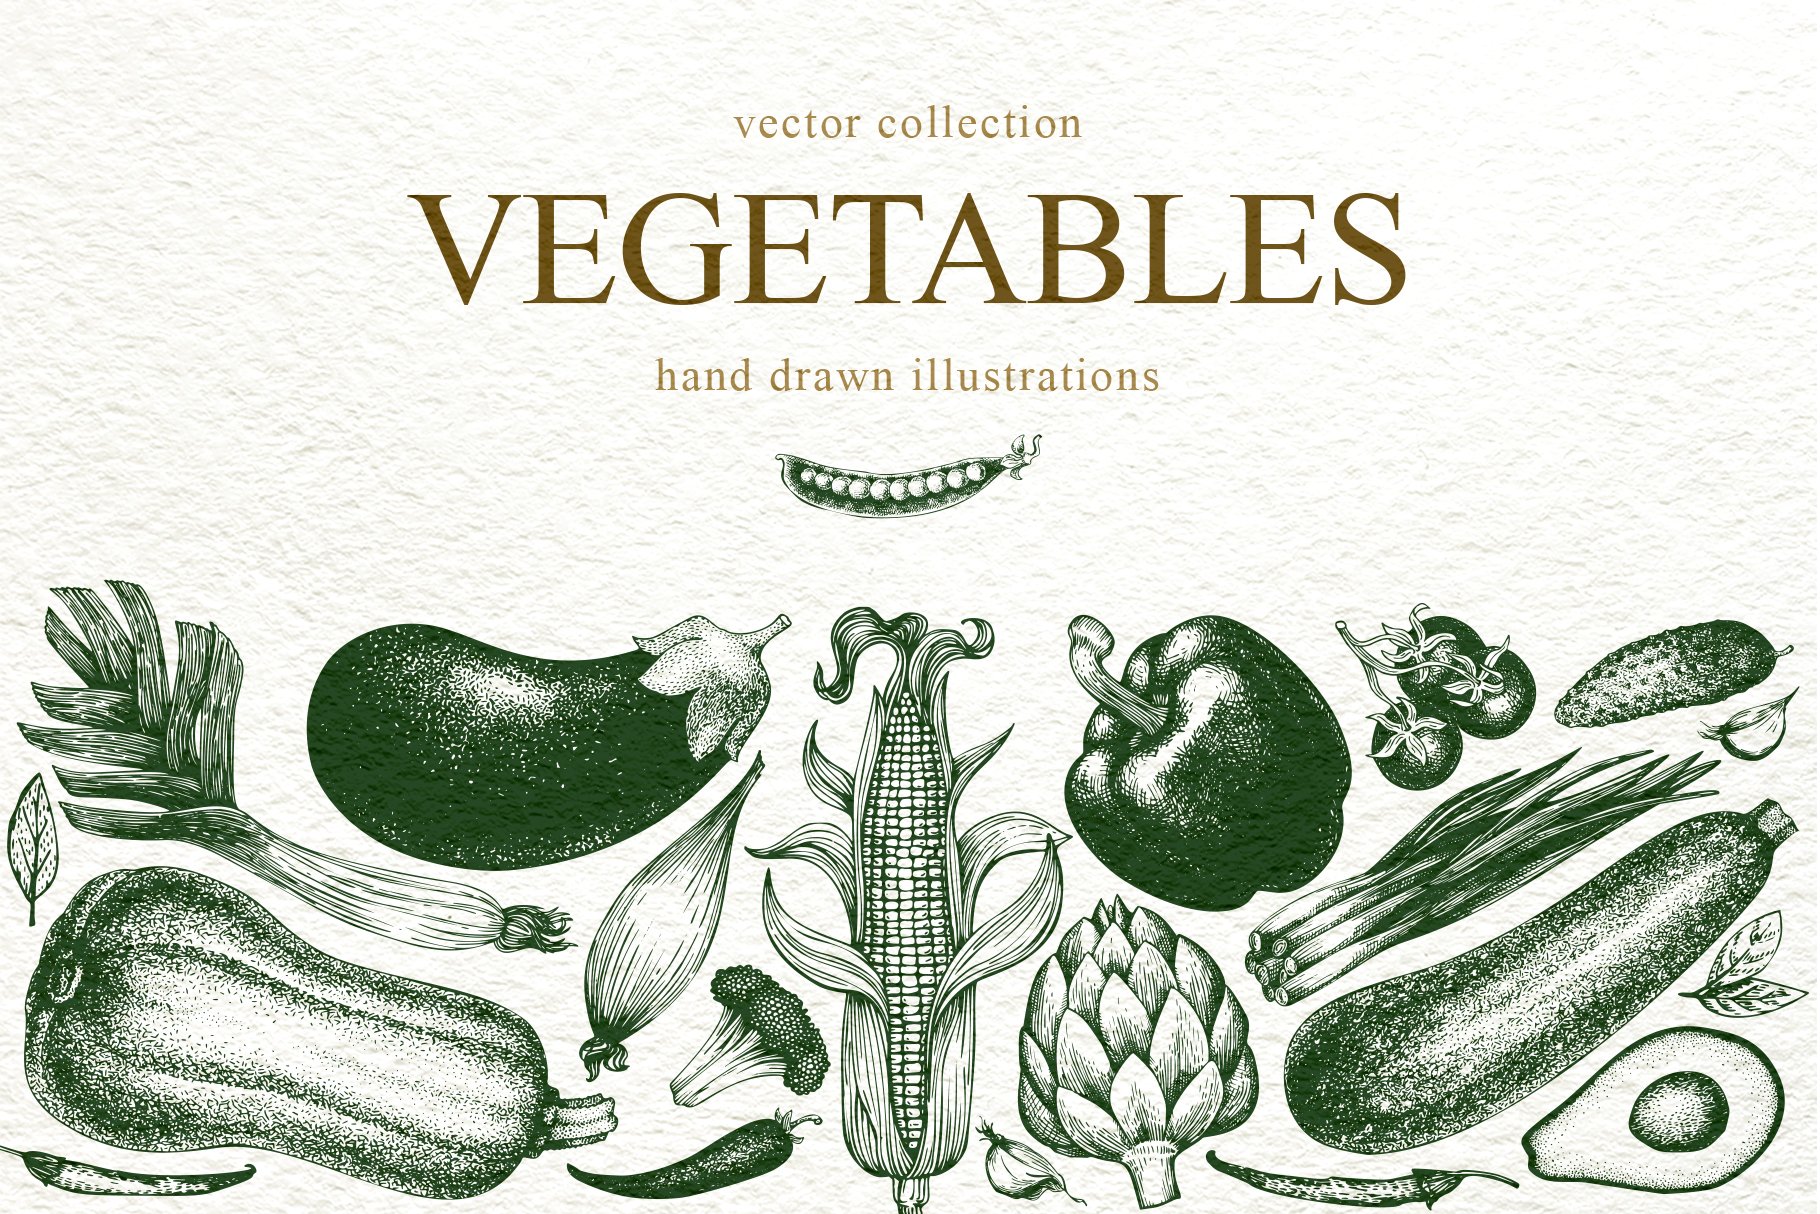 Vegetable Vector Collection cover image.